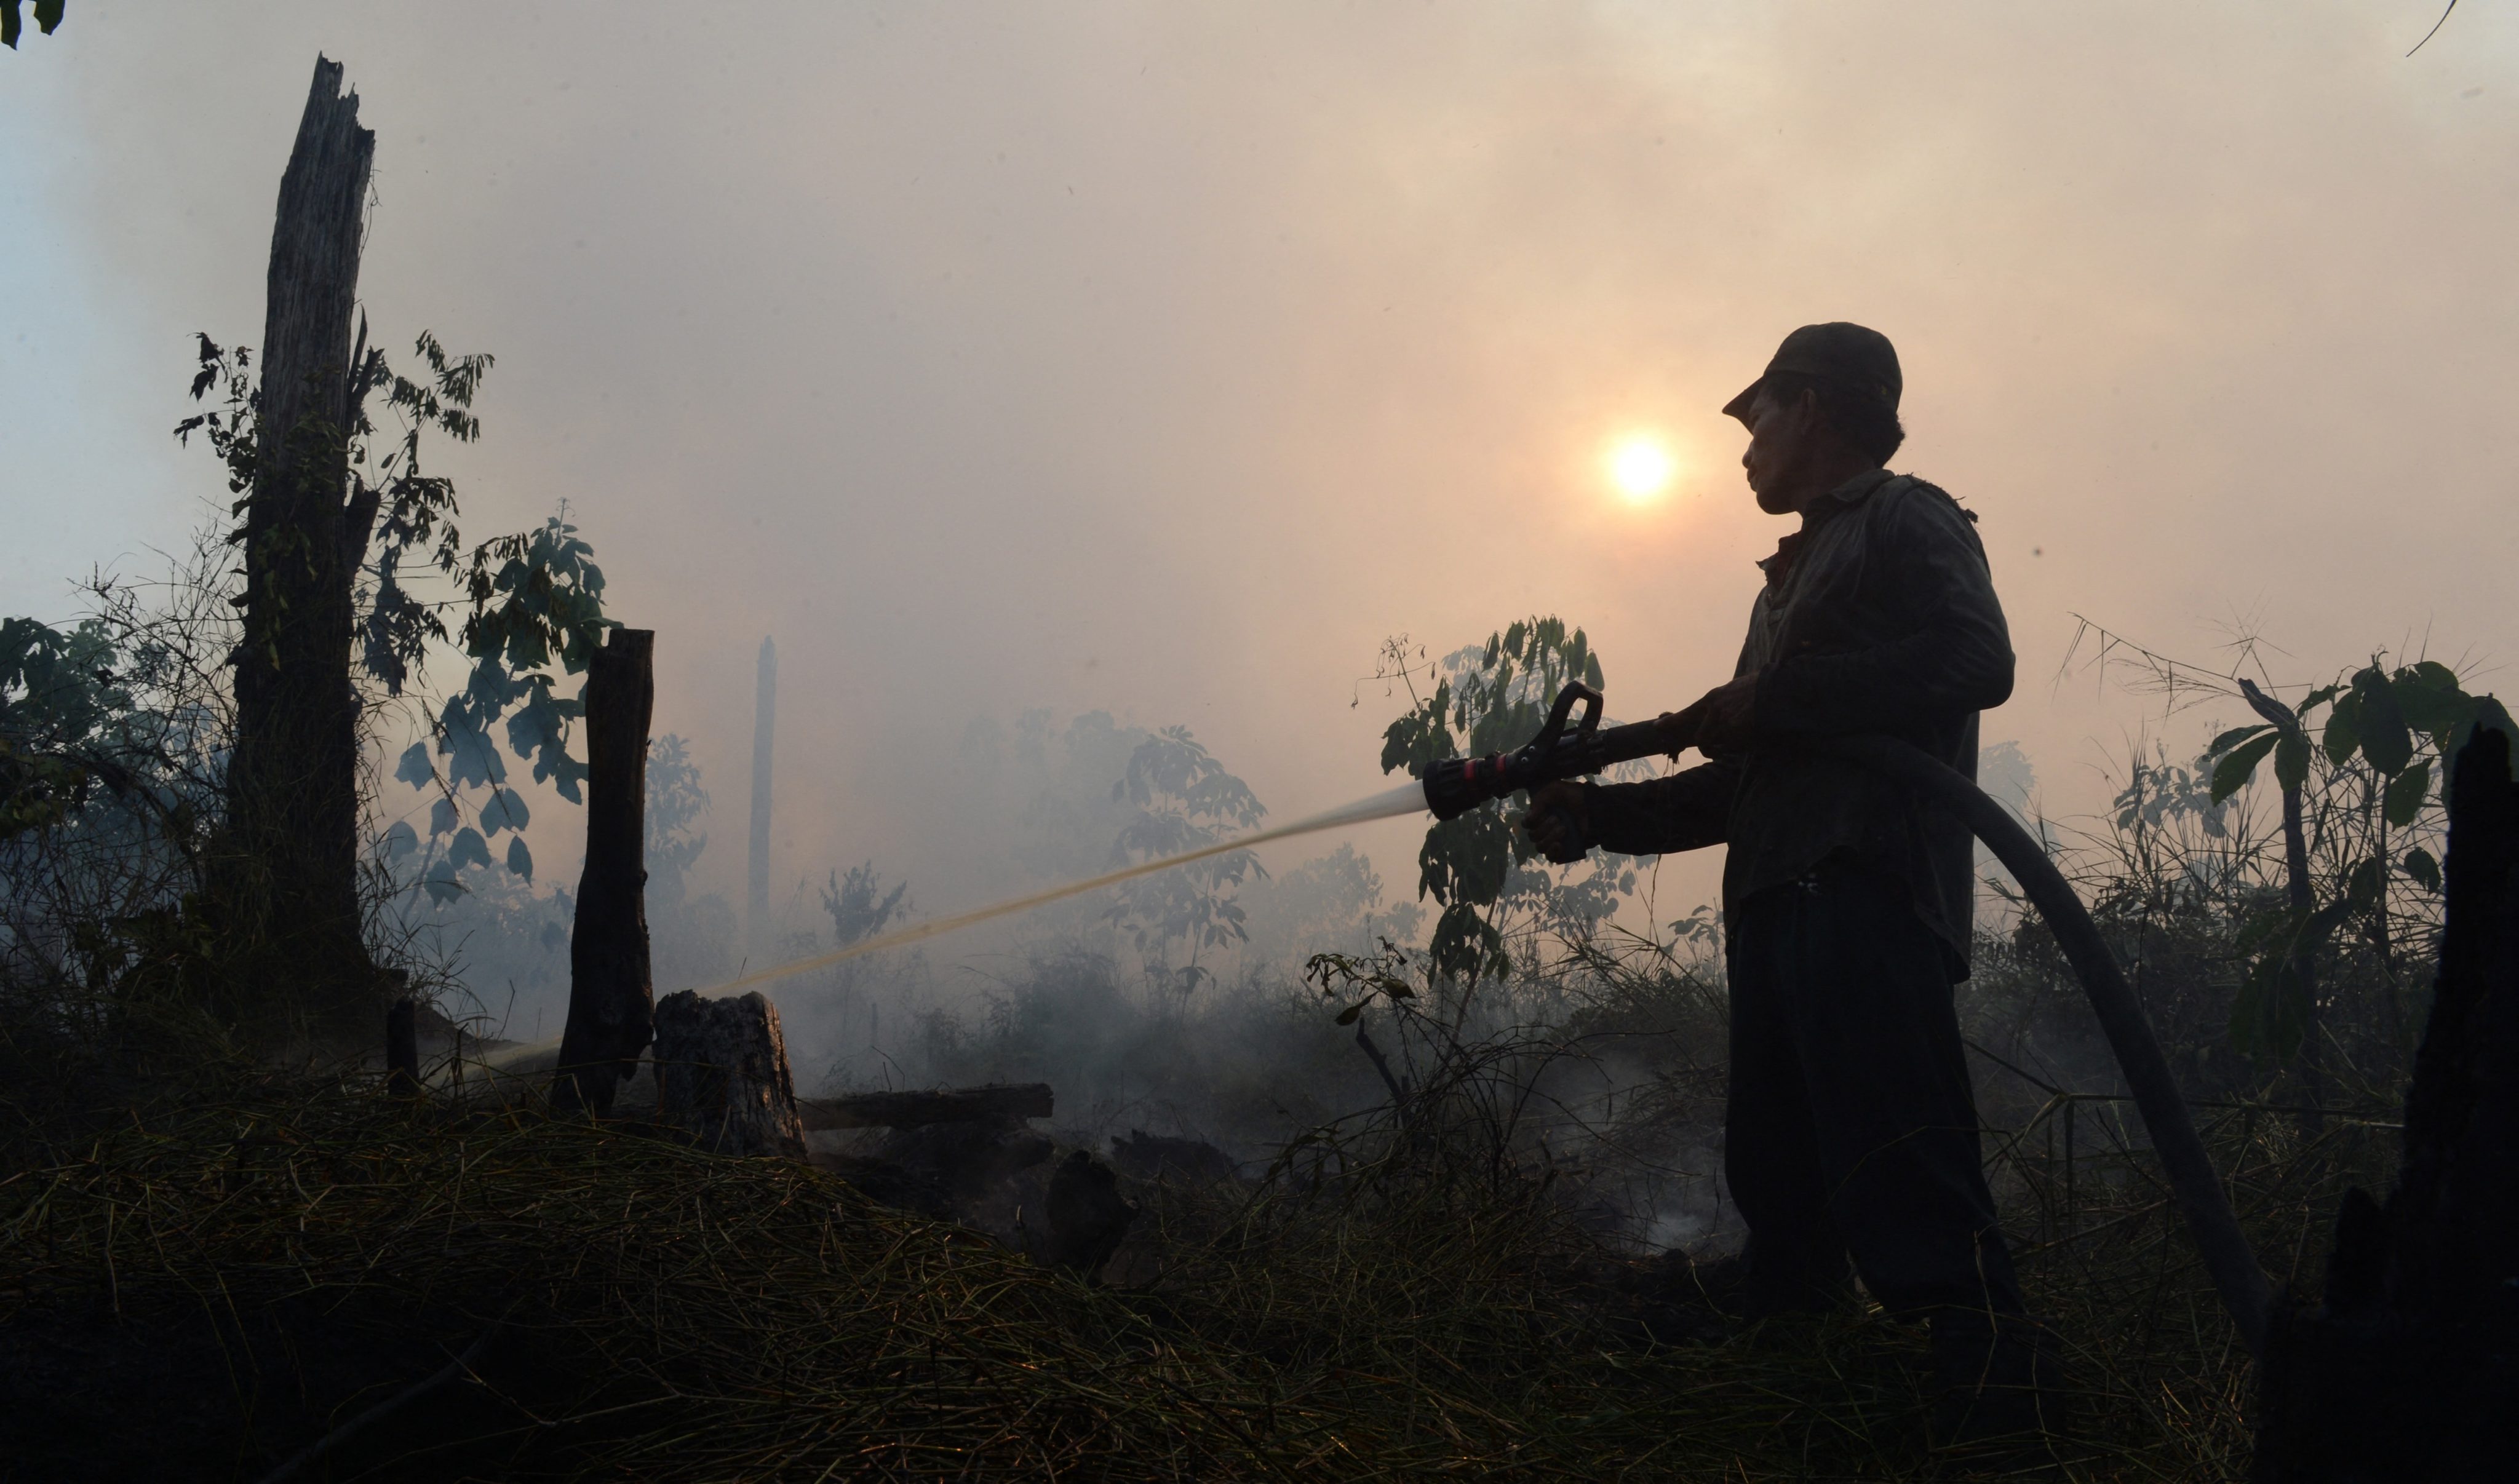 An Indonesian worker from a palm oil concession company extinguishes a forest fire in Sumatra, Indonesia. Illegal land clearing for palm oil plantations is common, causing smog and habitat loss for endangered wildlife. Photo: AFP